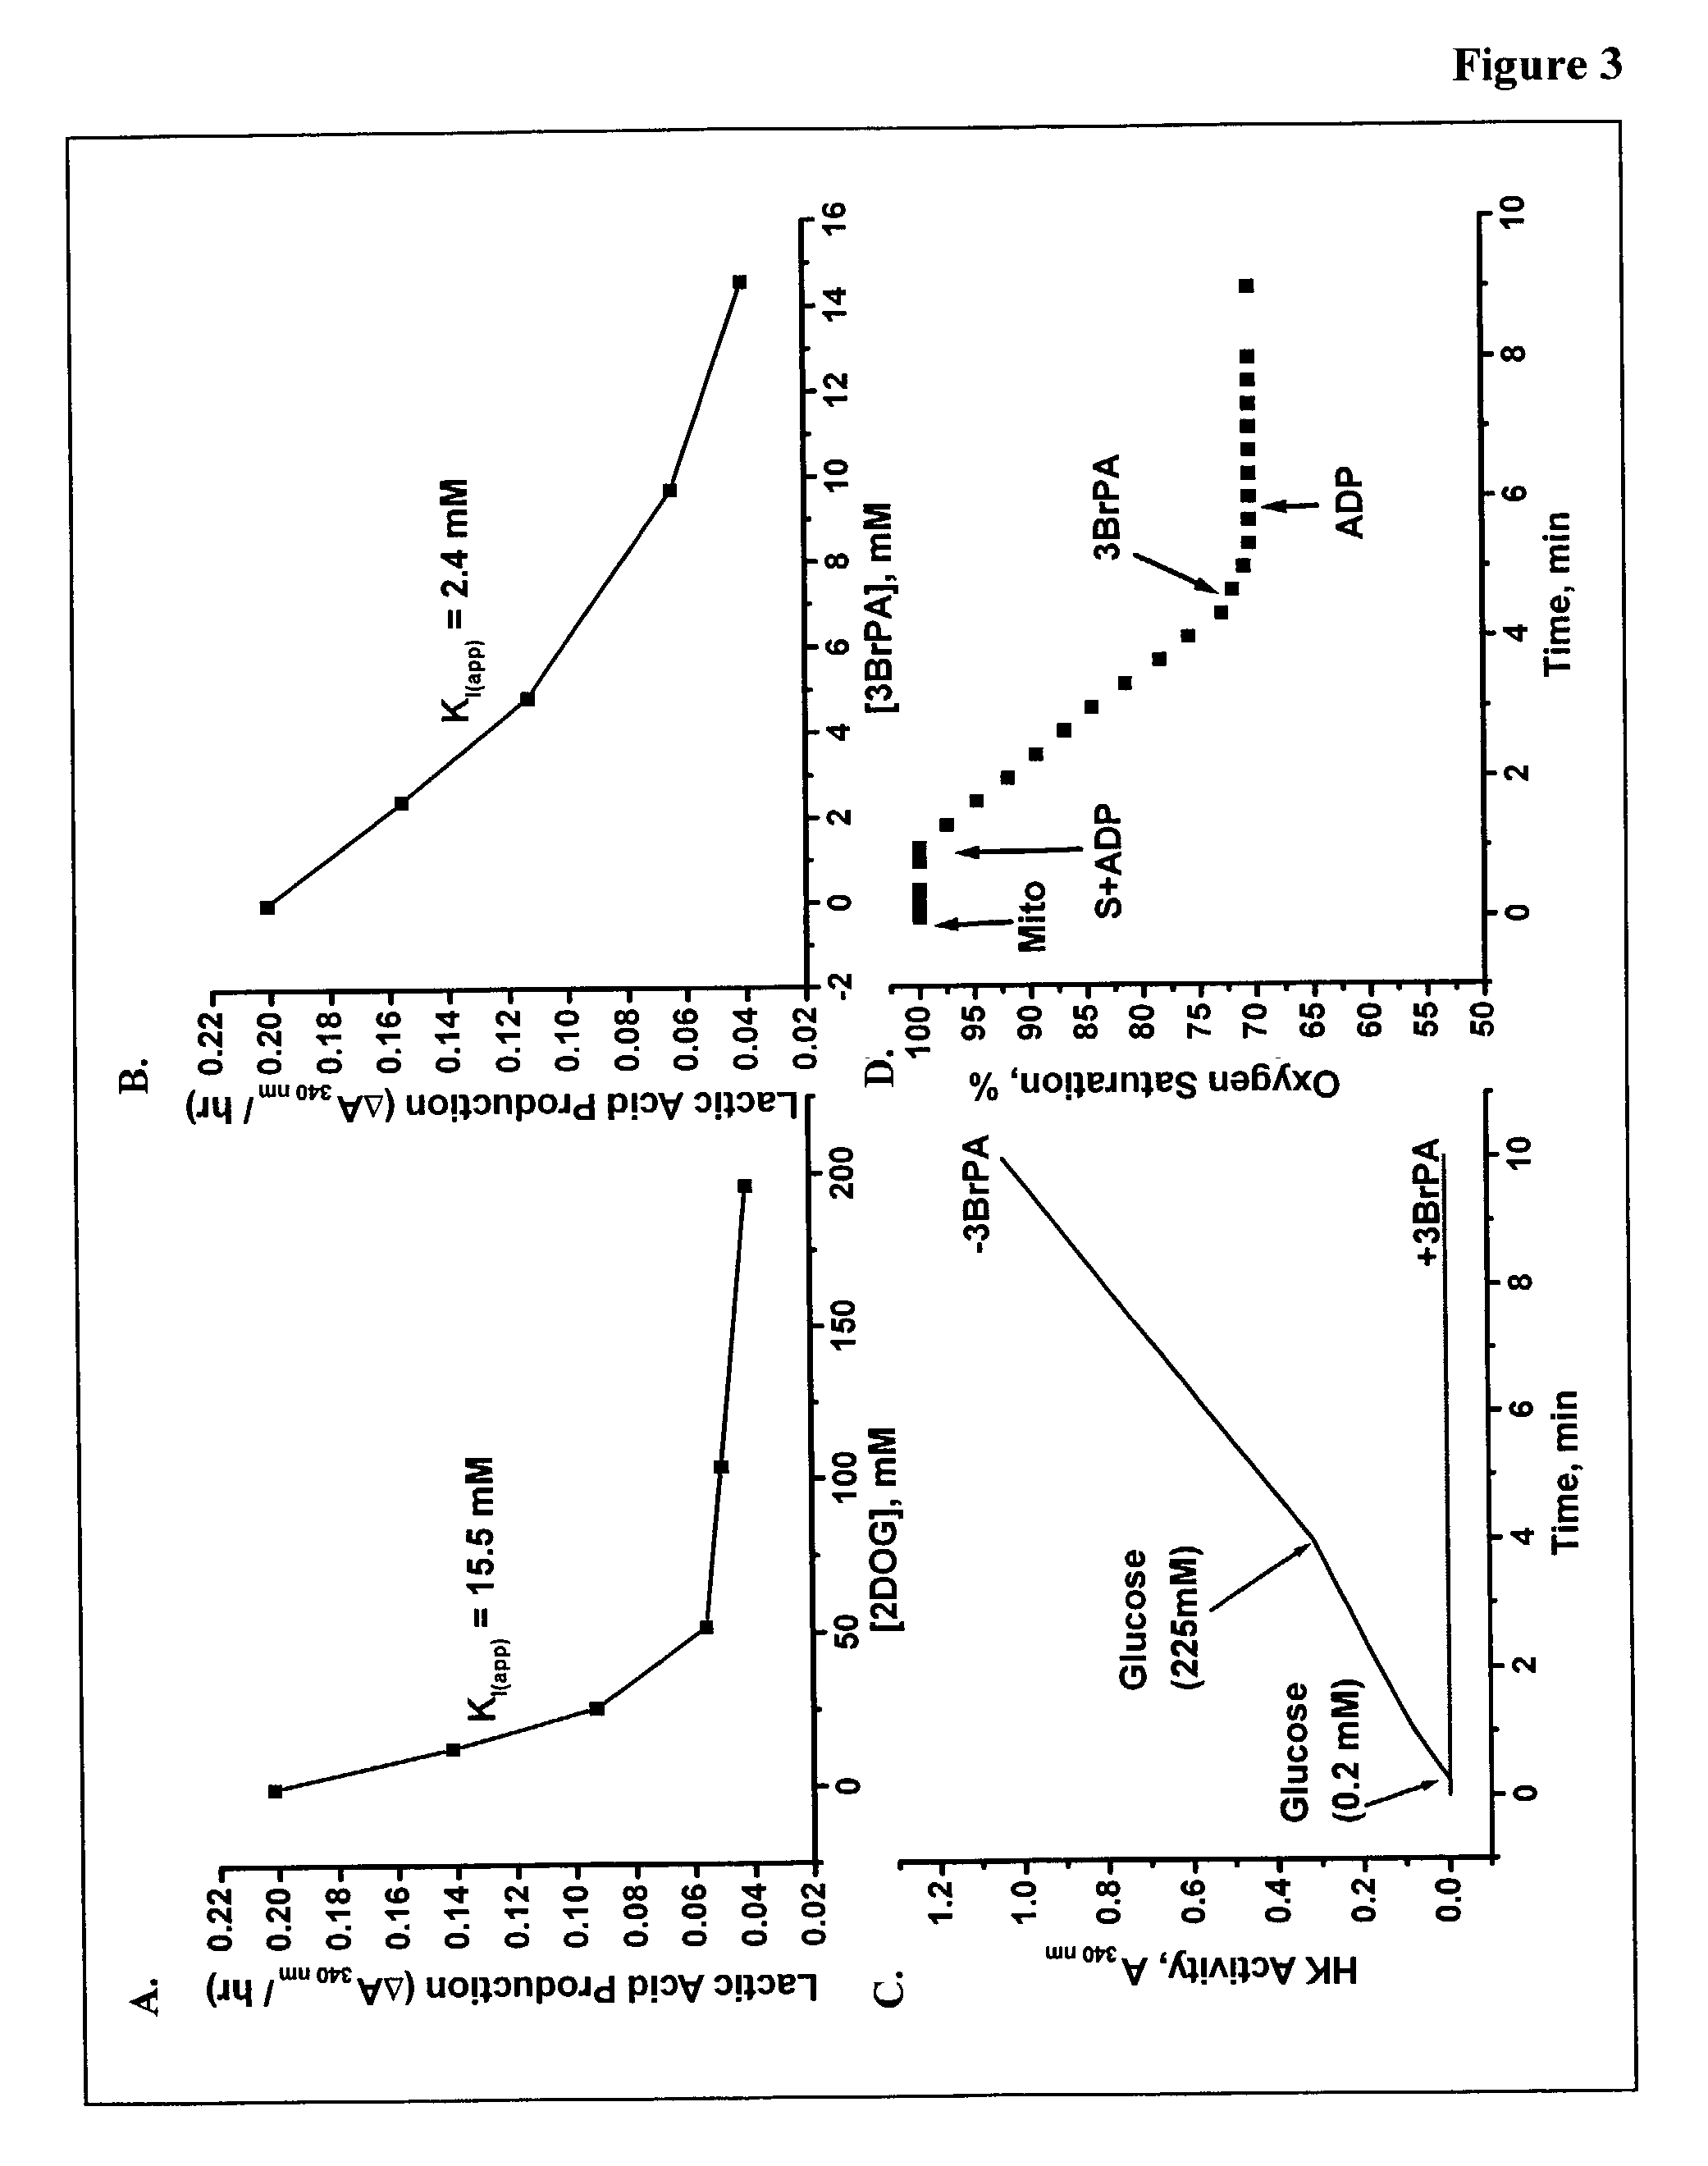 Therapeutics for cancer using 3-bromopyruvate and other selective inhibitors of ATP production